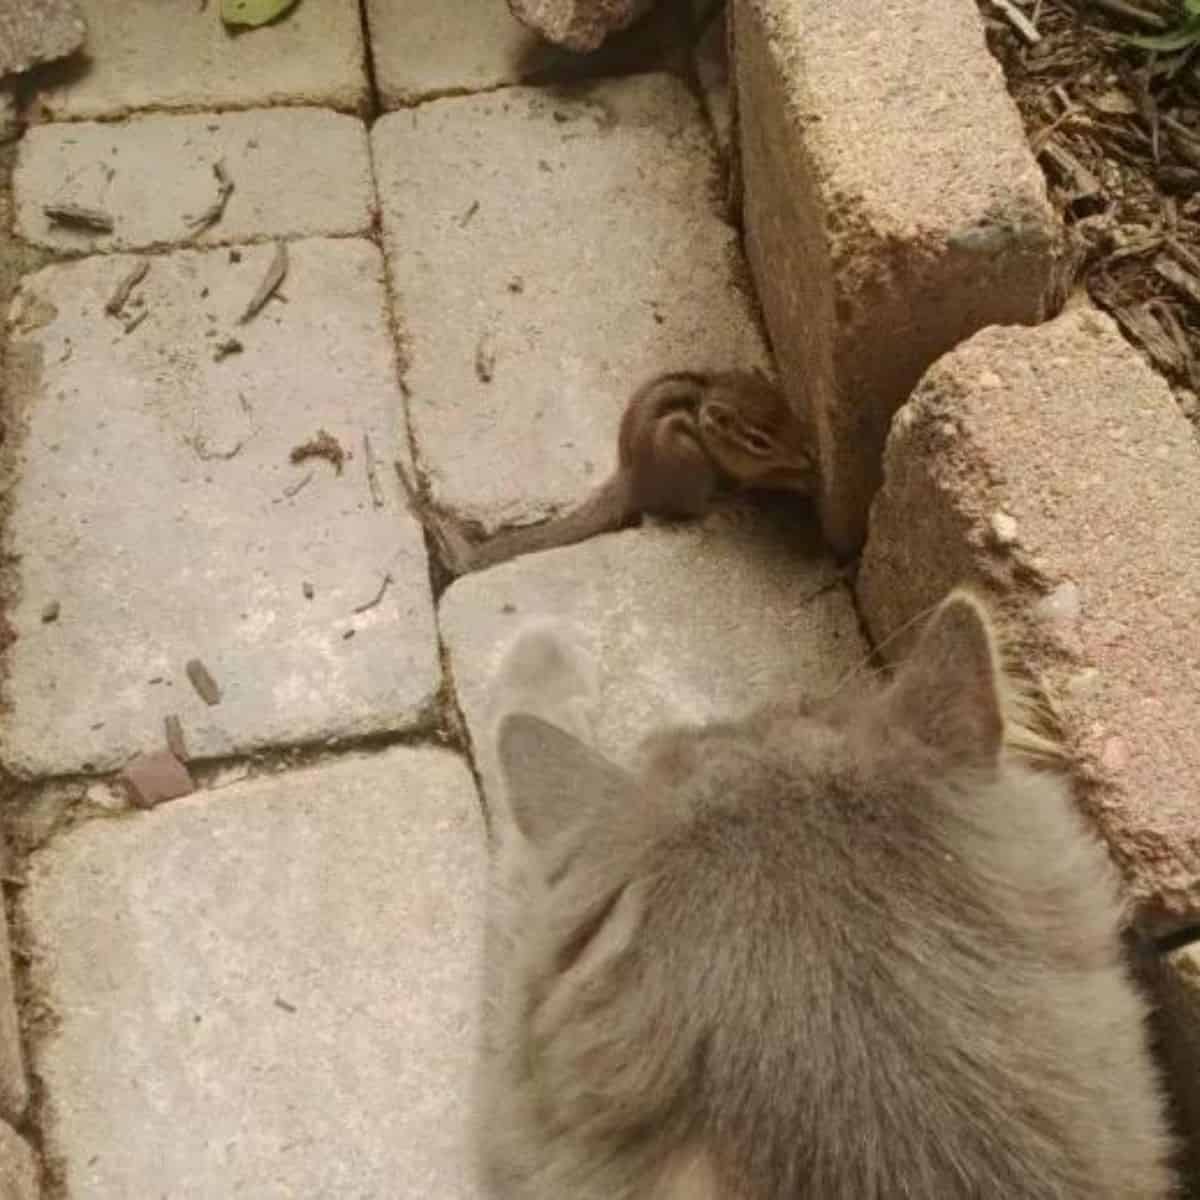 the cat sniffs the squirrel